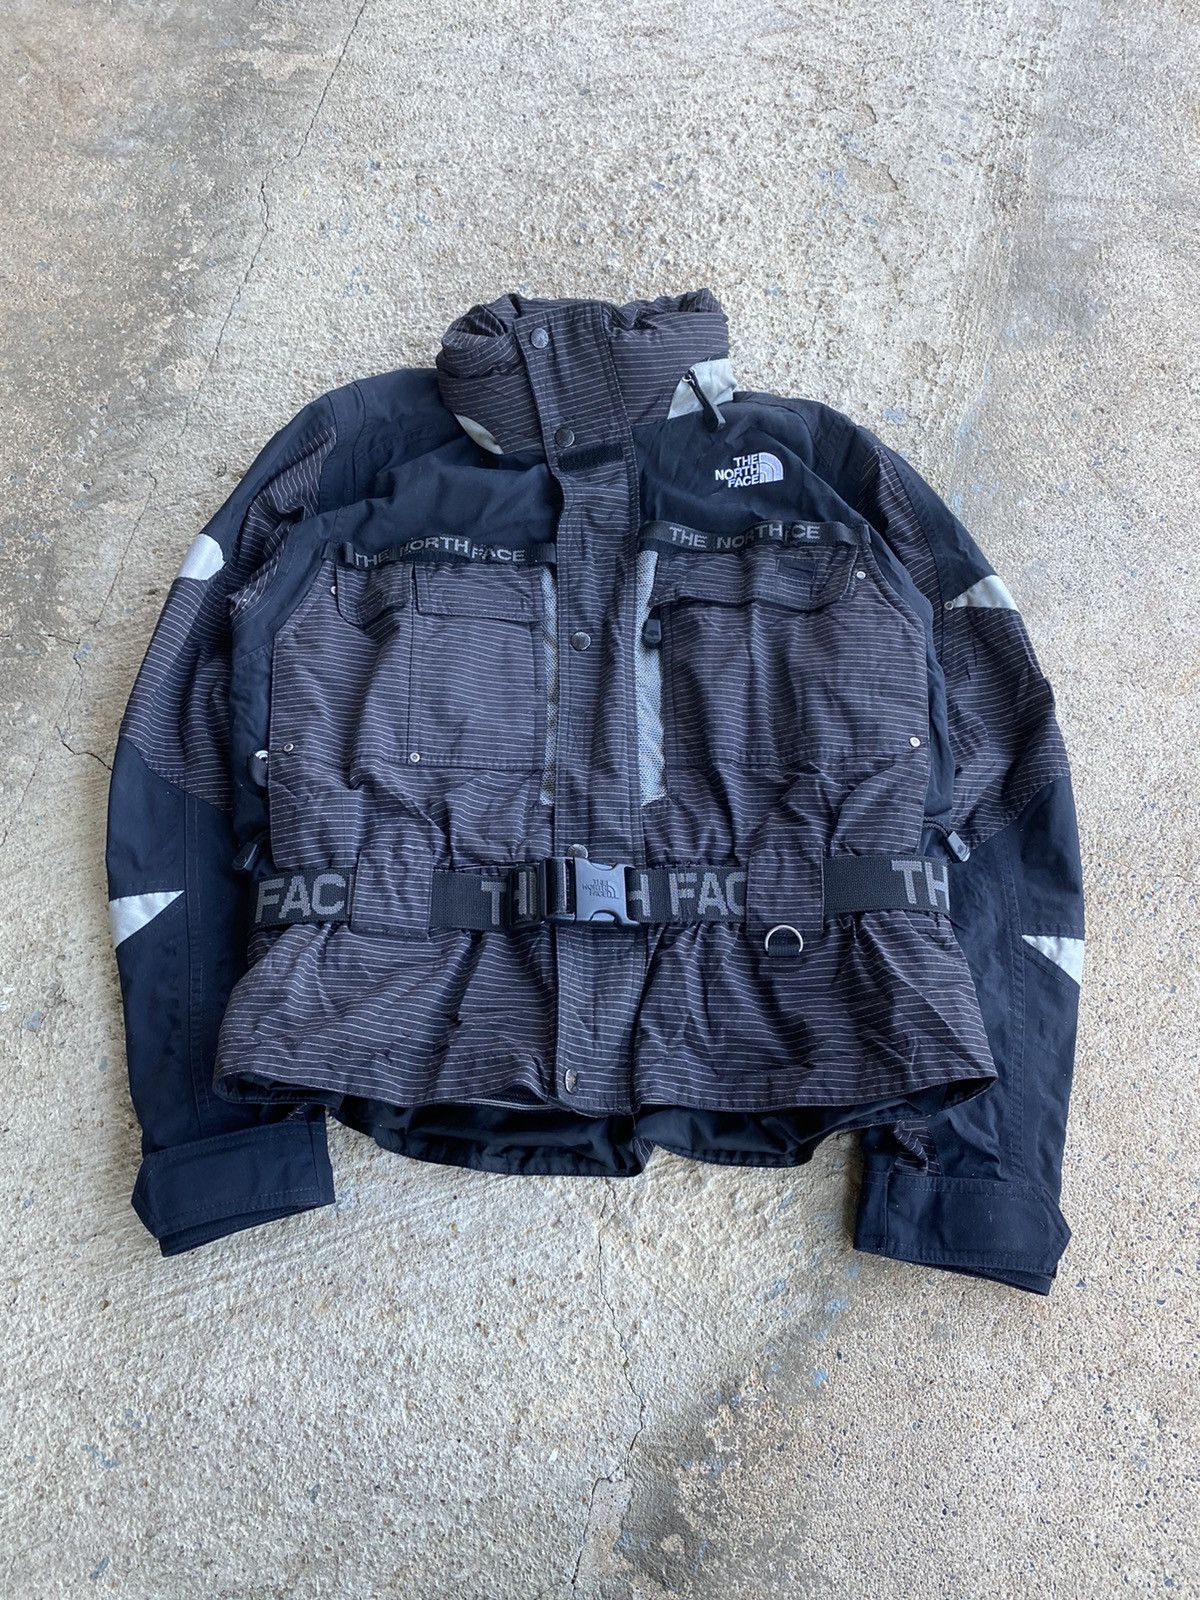 The North Face Steep Tech Vintage | Grailed